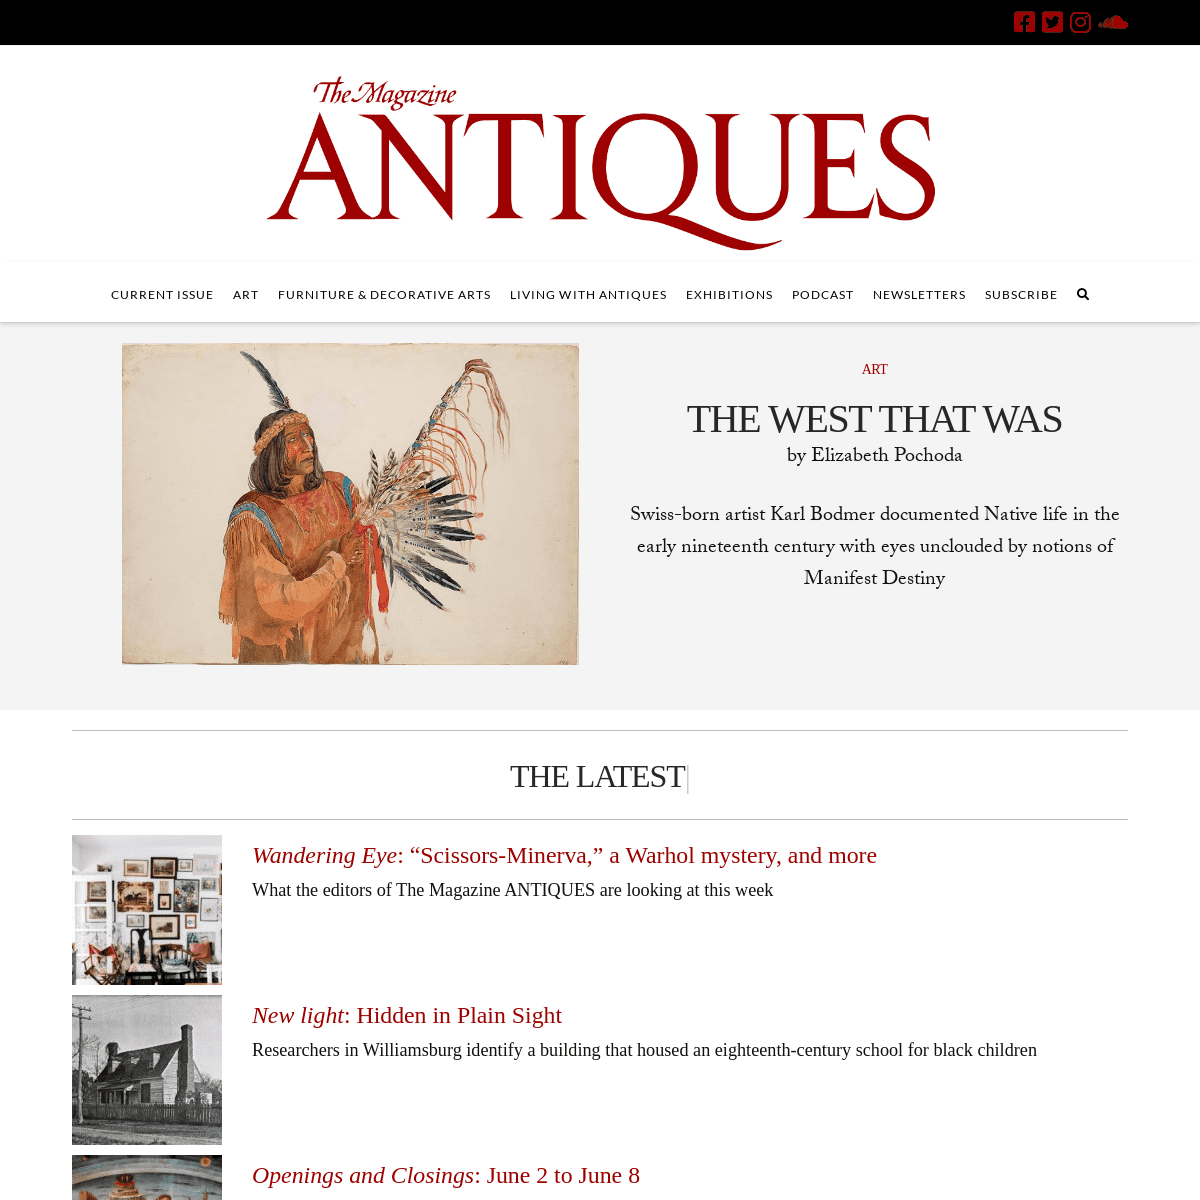 A complete backup of https://themagazineantiques.com